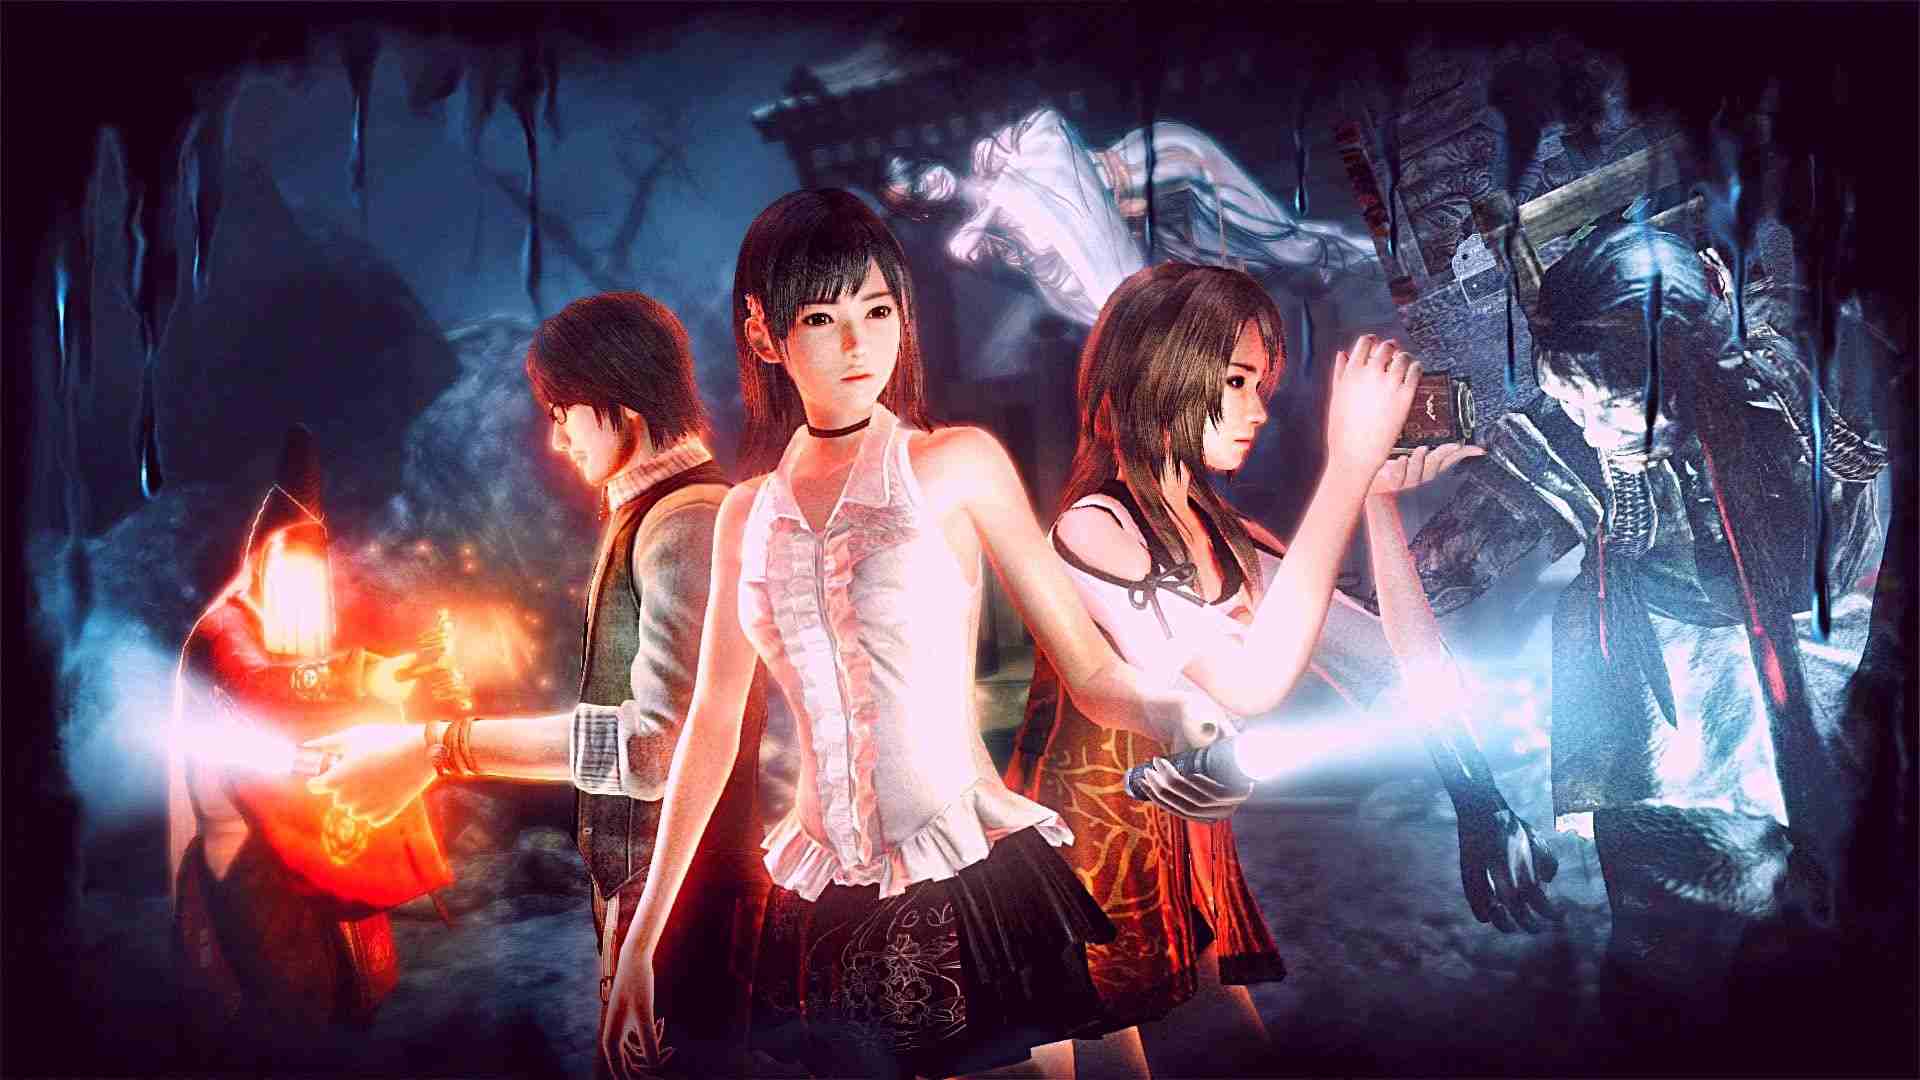 Fatal Frame: Maiden of Black Water Age Rating, Parents Guide | 2014